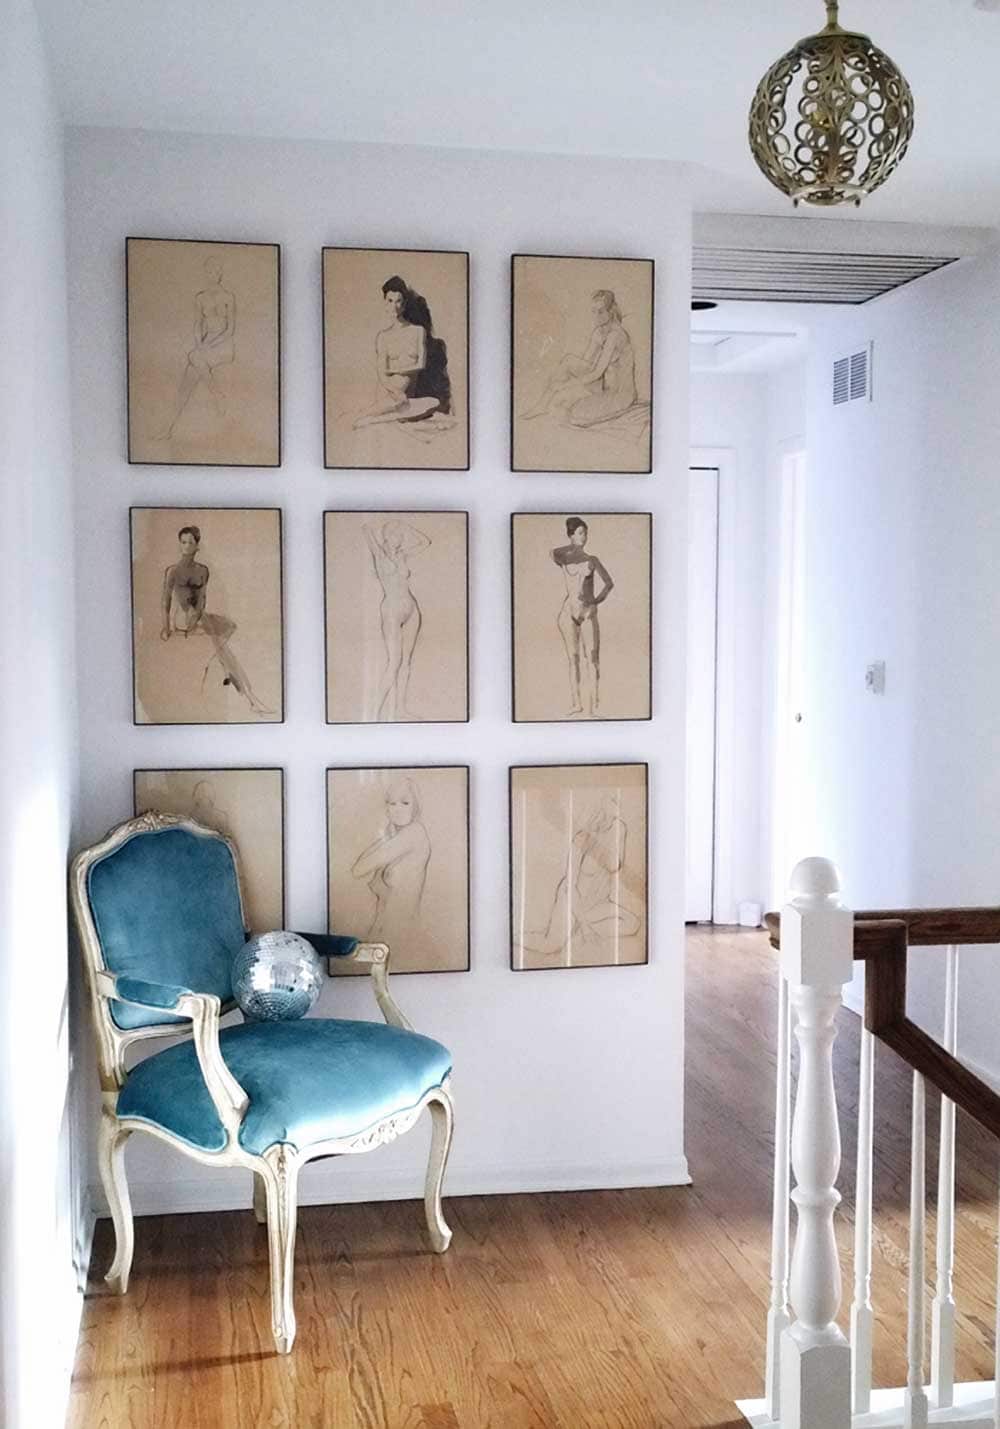 Find Original Affordable Art at an estate sale. These nude charcoal sketches were tucked away in a cabinet at an estate sale - definitely a secret source to find affordable original art